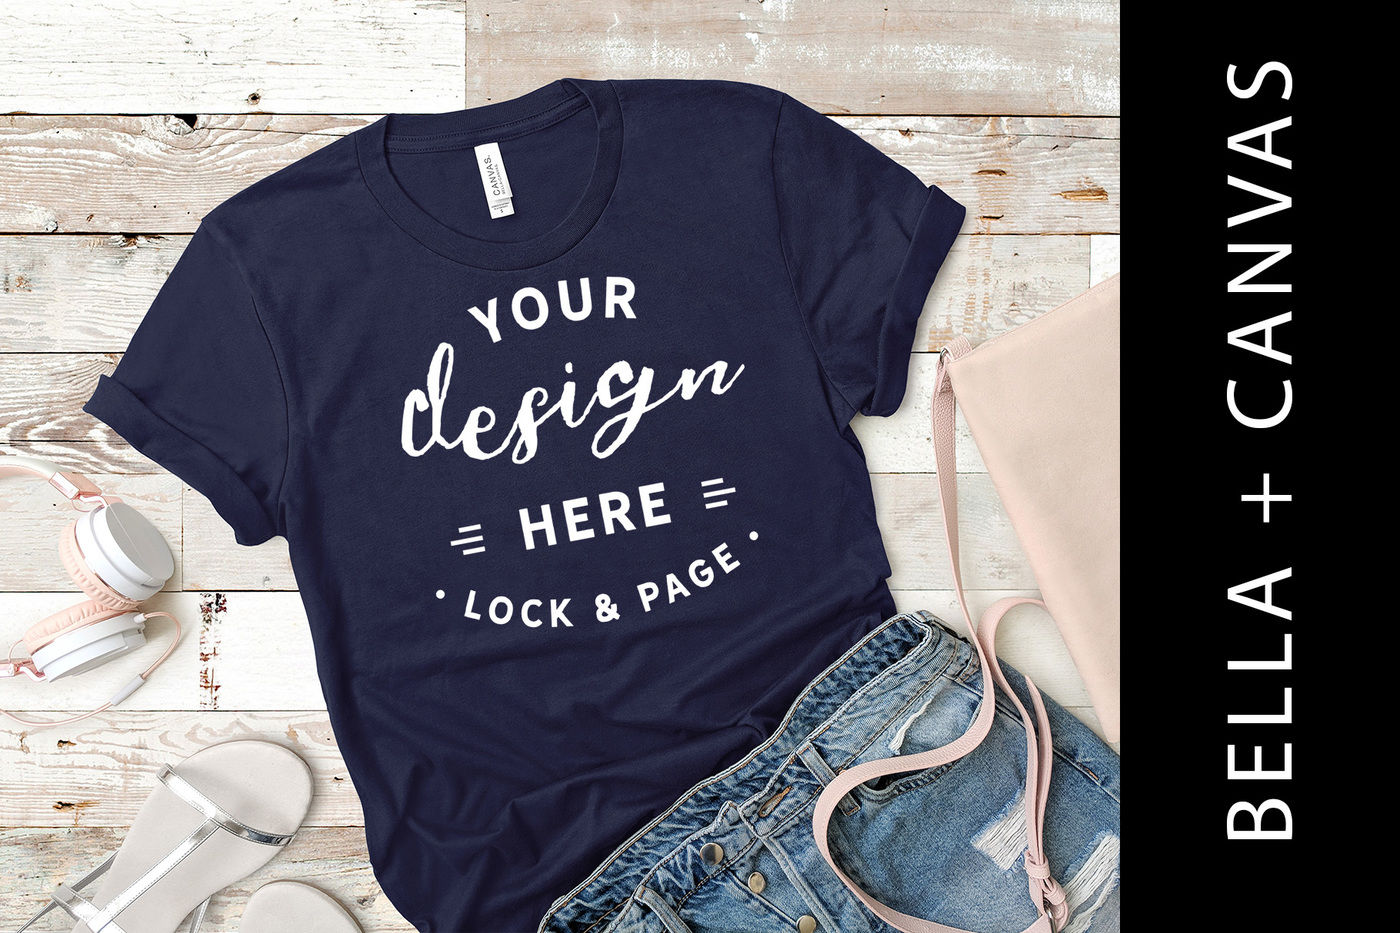 Download Vintage Black Bella Canvas 3001 Men S T Shirt Mockup With Shoes And Jeans On Barn Wood Background Hi Res 300 Ppi Jpg Files Photography Art Collectibles Seasonalliving Com